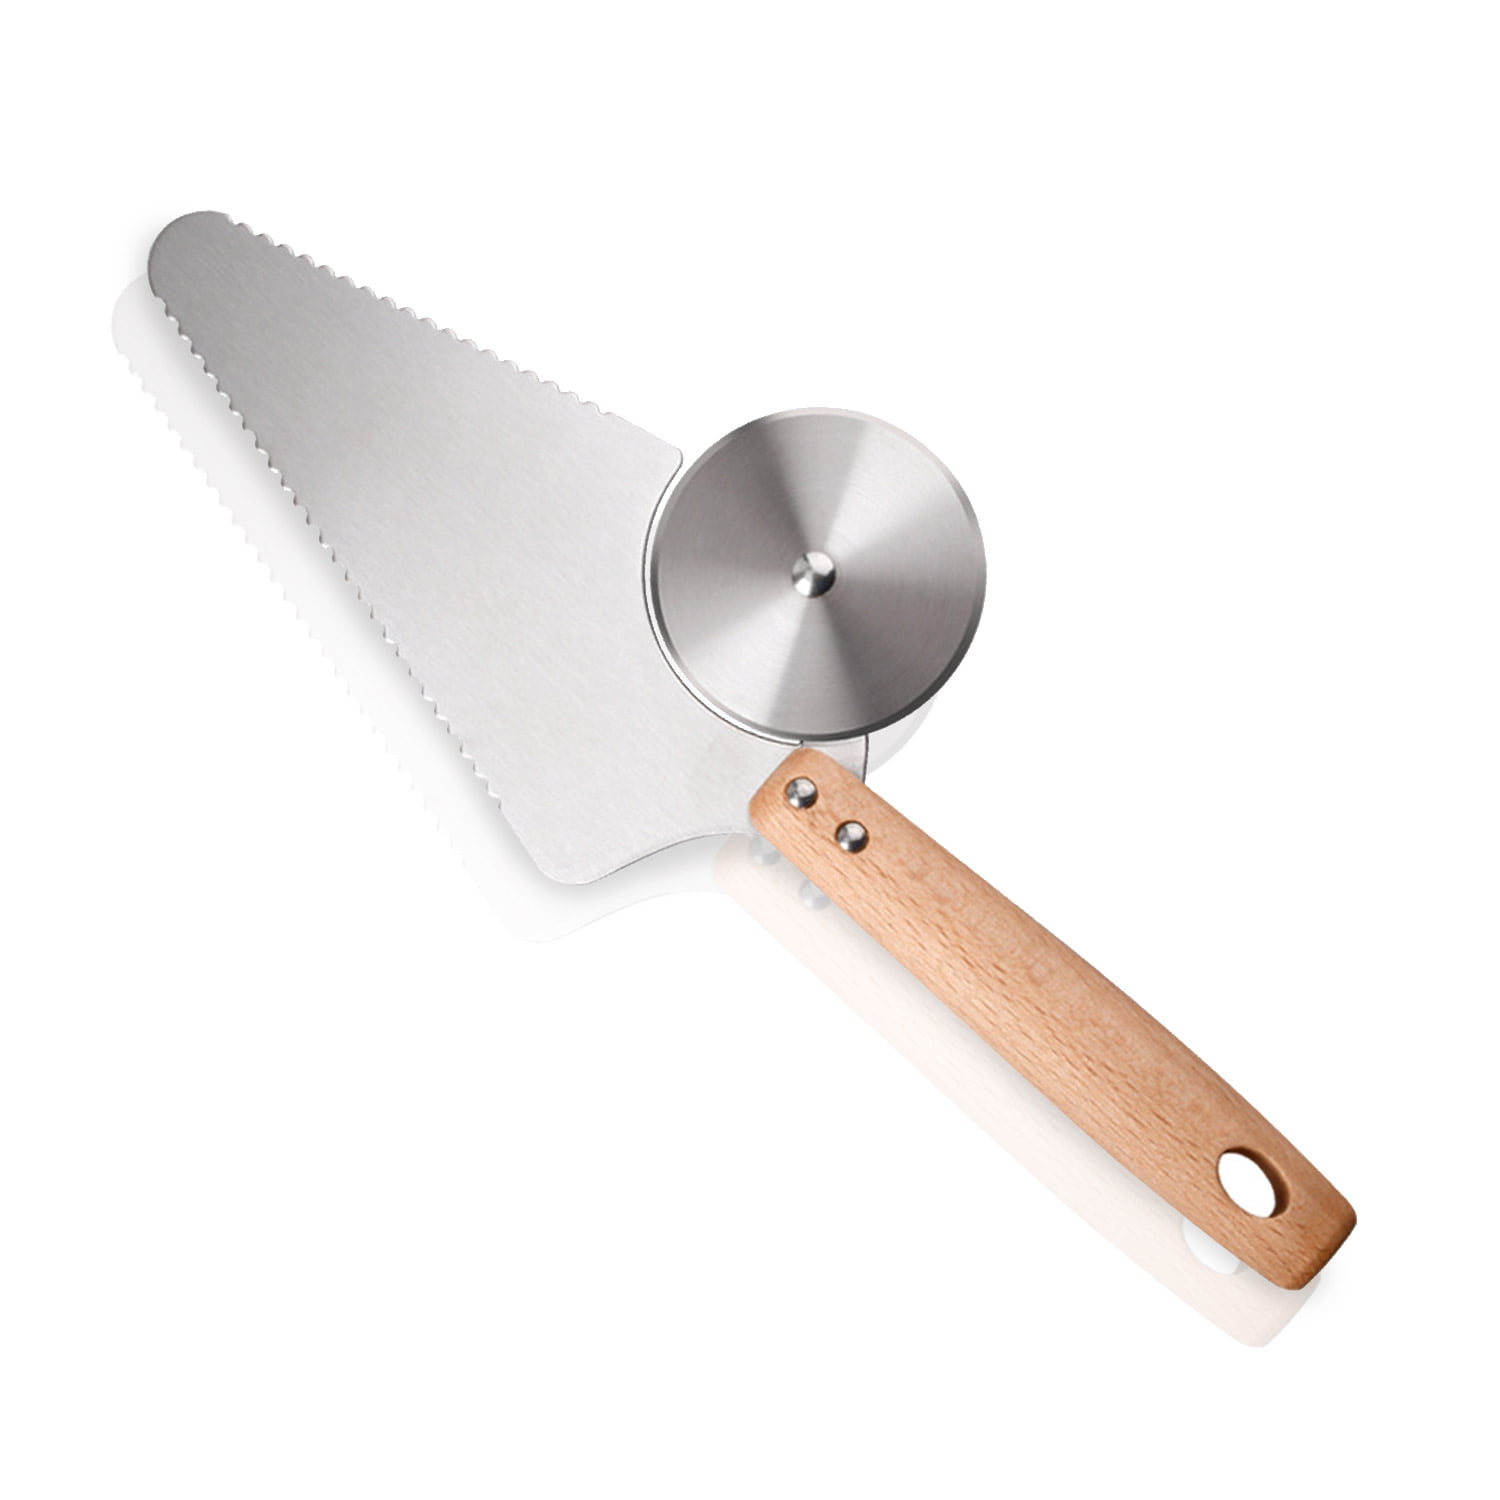 Stainless Steel Pizza Cutter Kitchen Restaurant Pastry Dough Cutting Tool Slicer